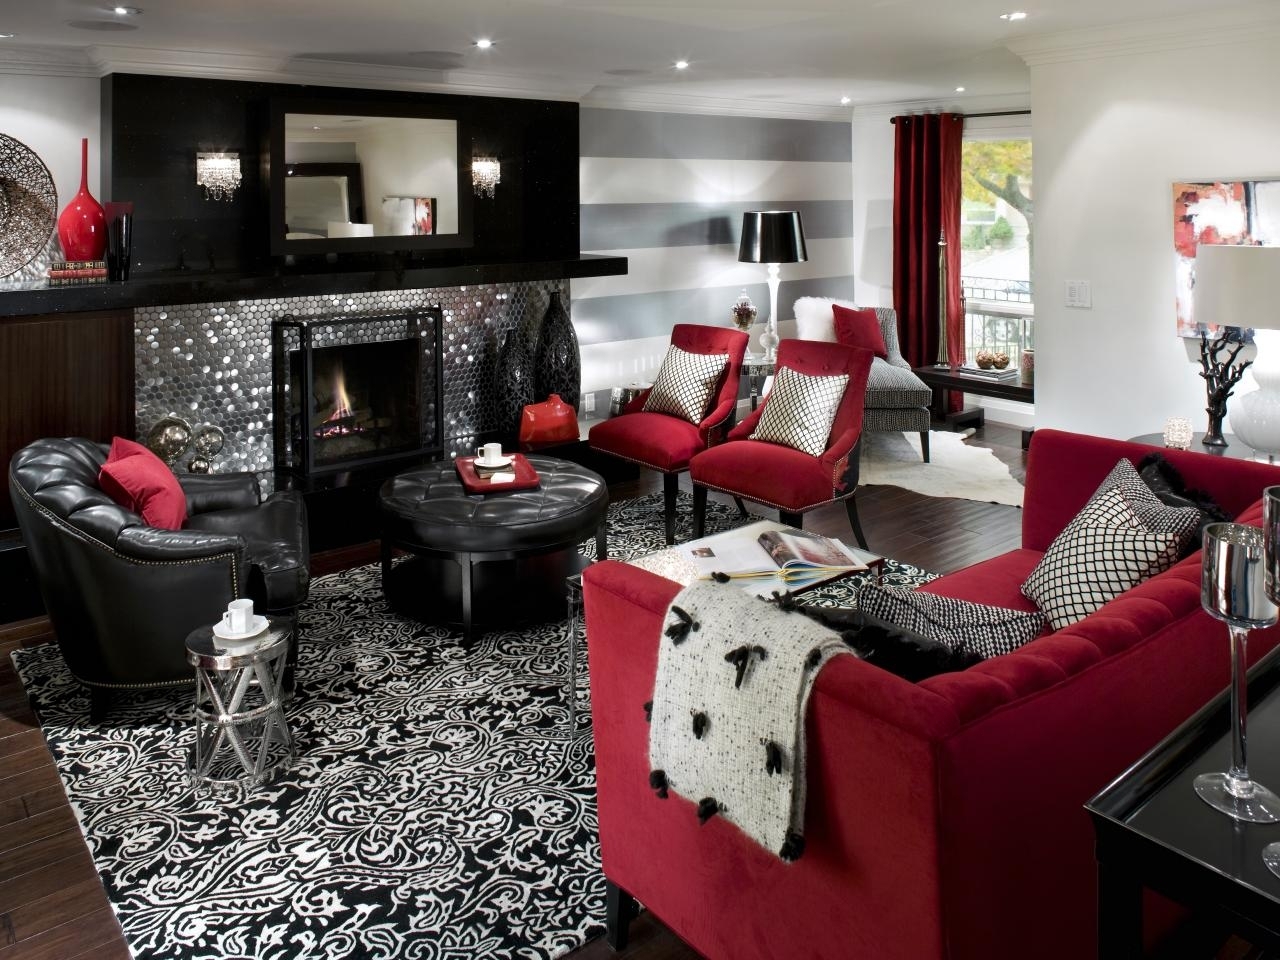 10 Beautiful Red And Black Living Room Ideas 2020